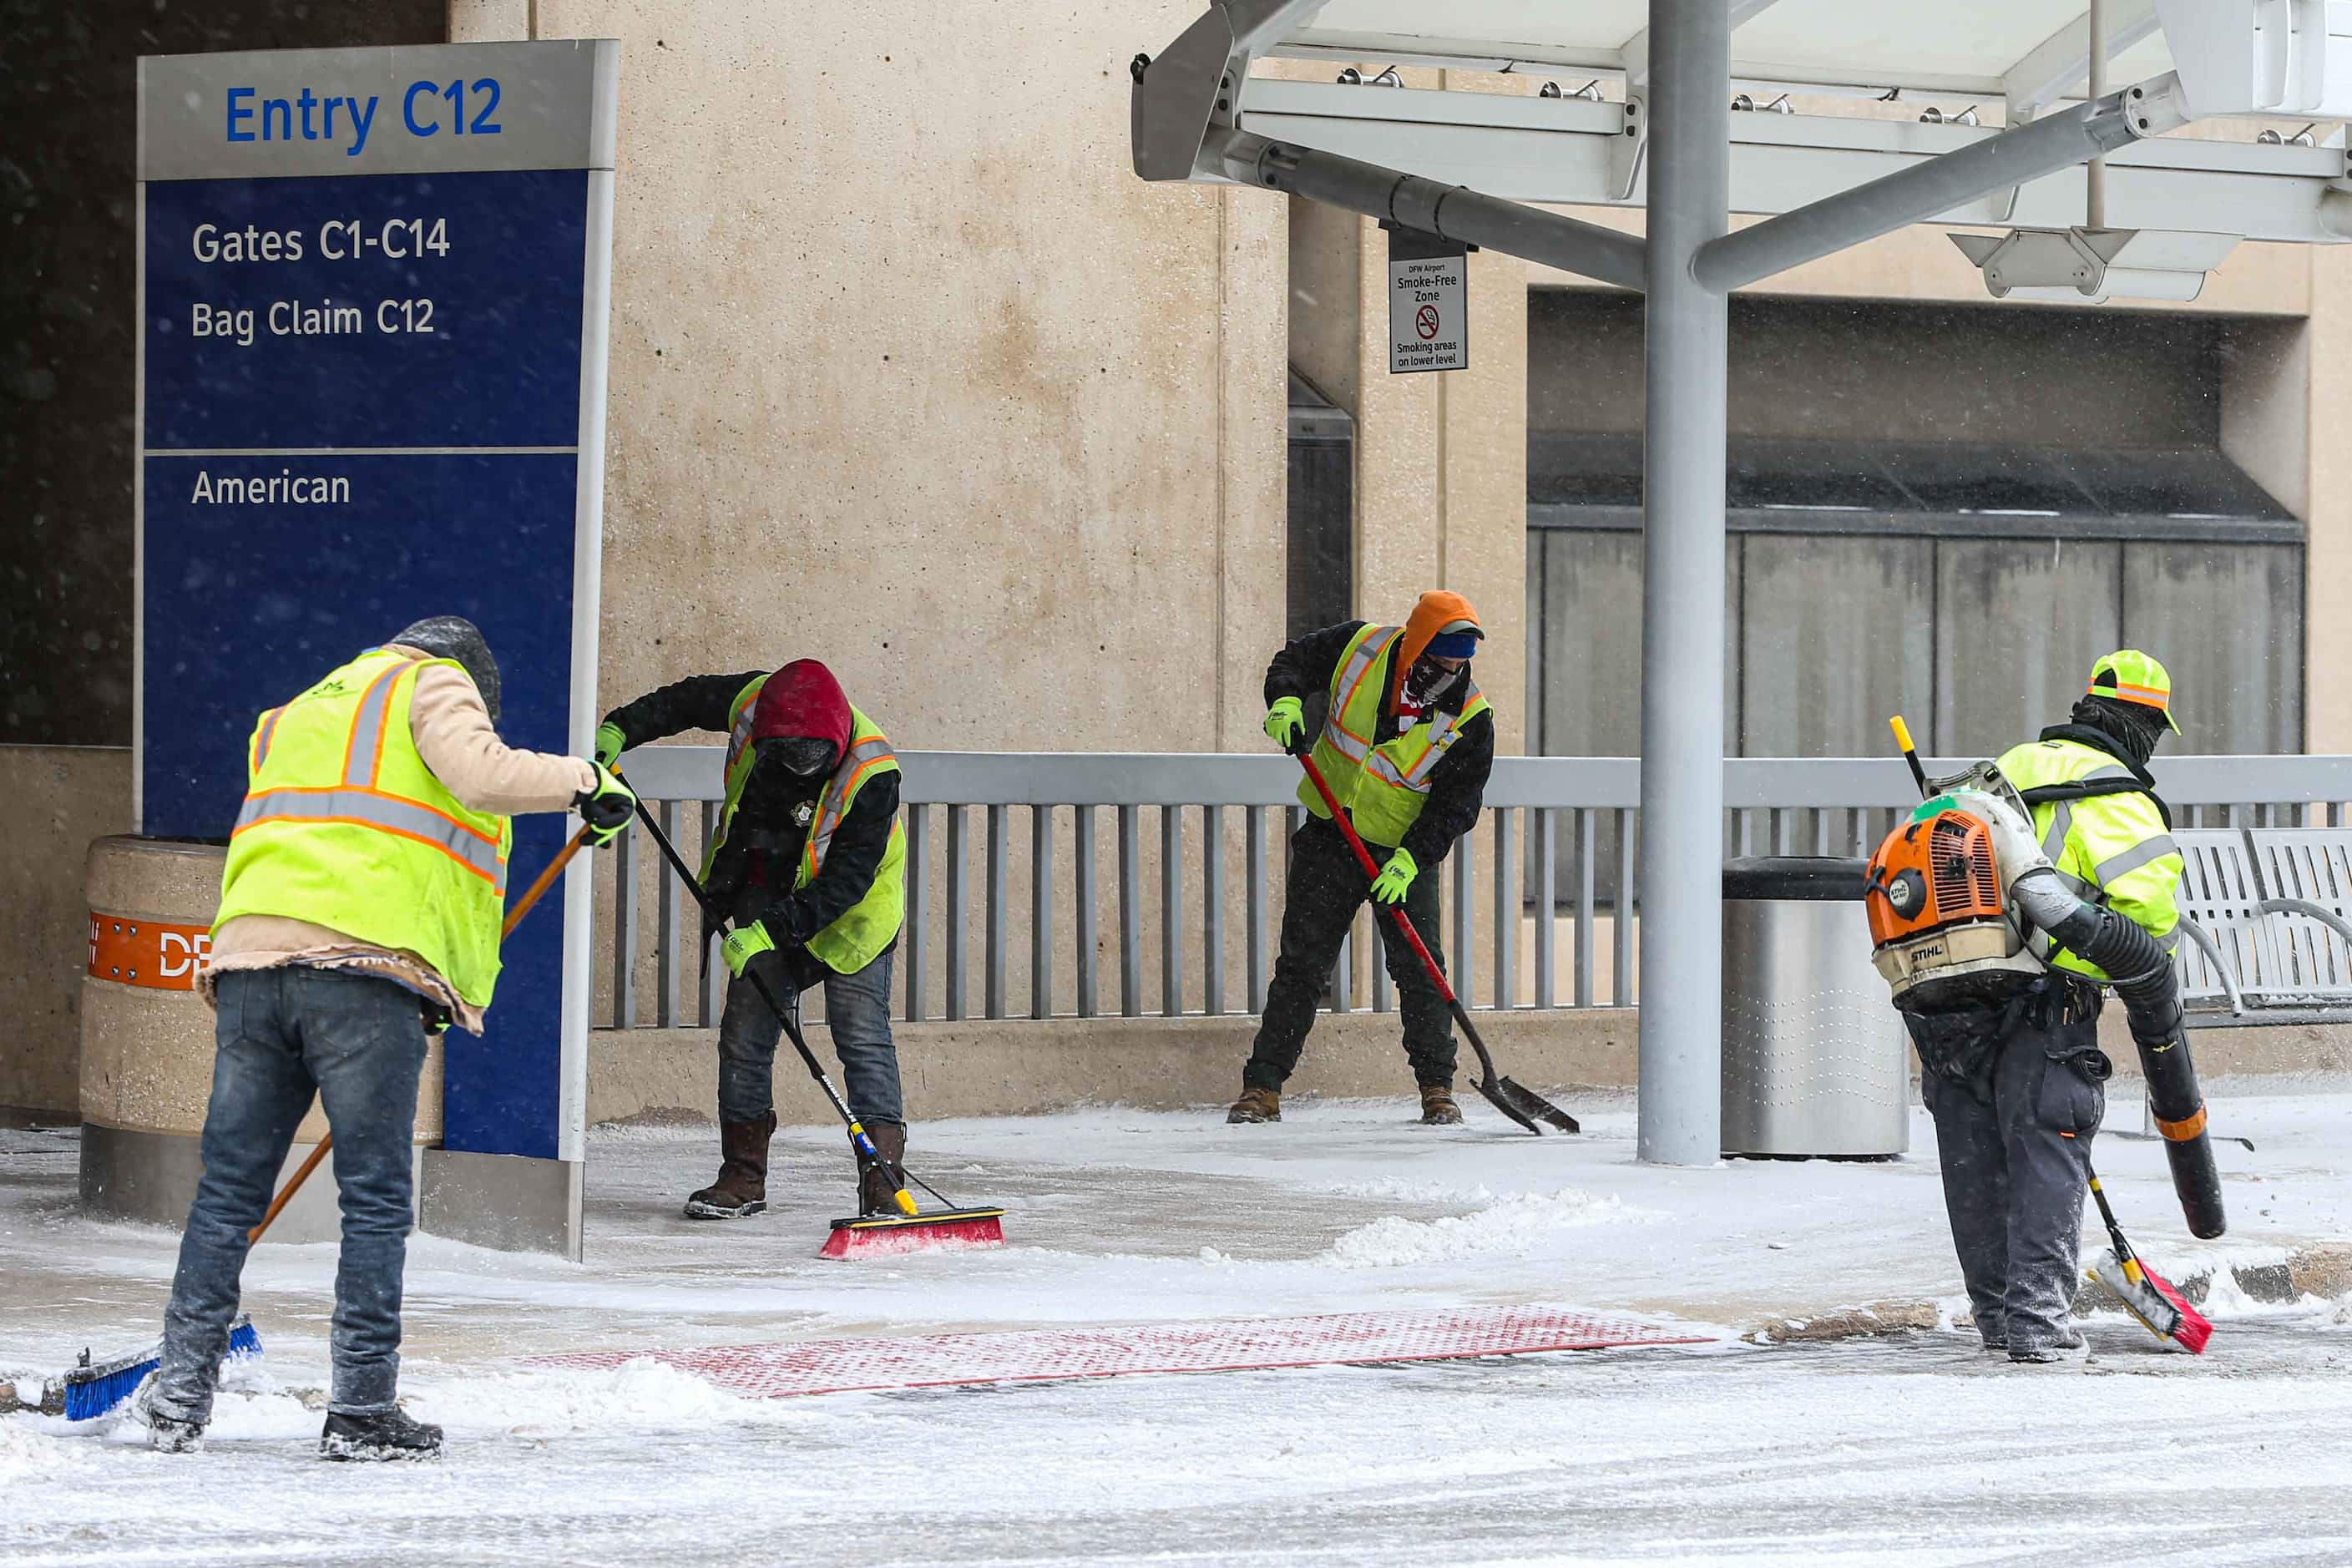 Workers keep the sidewalks clear as snow, ice decend over DFW International Airport....